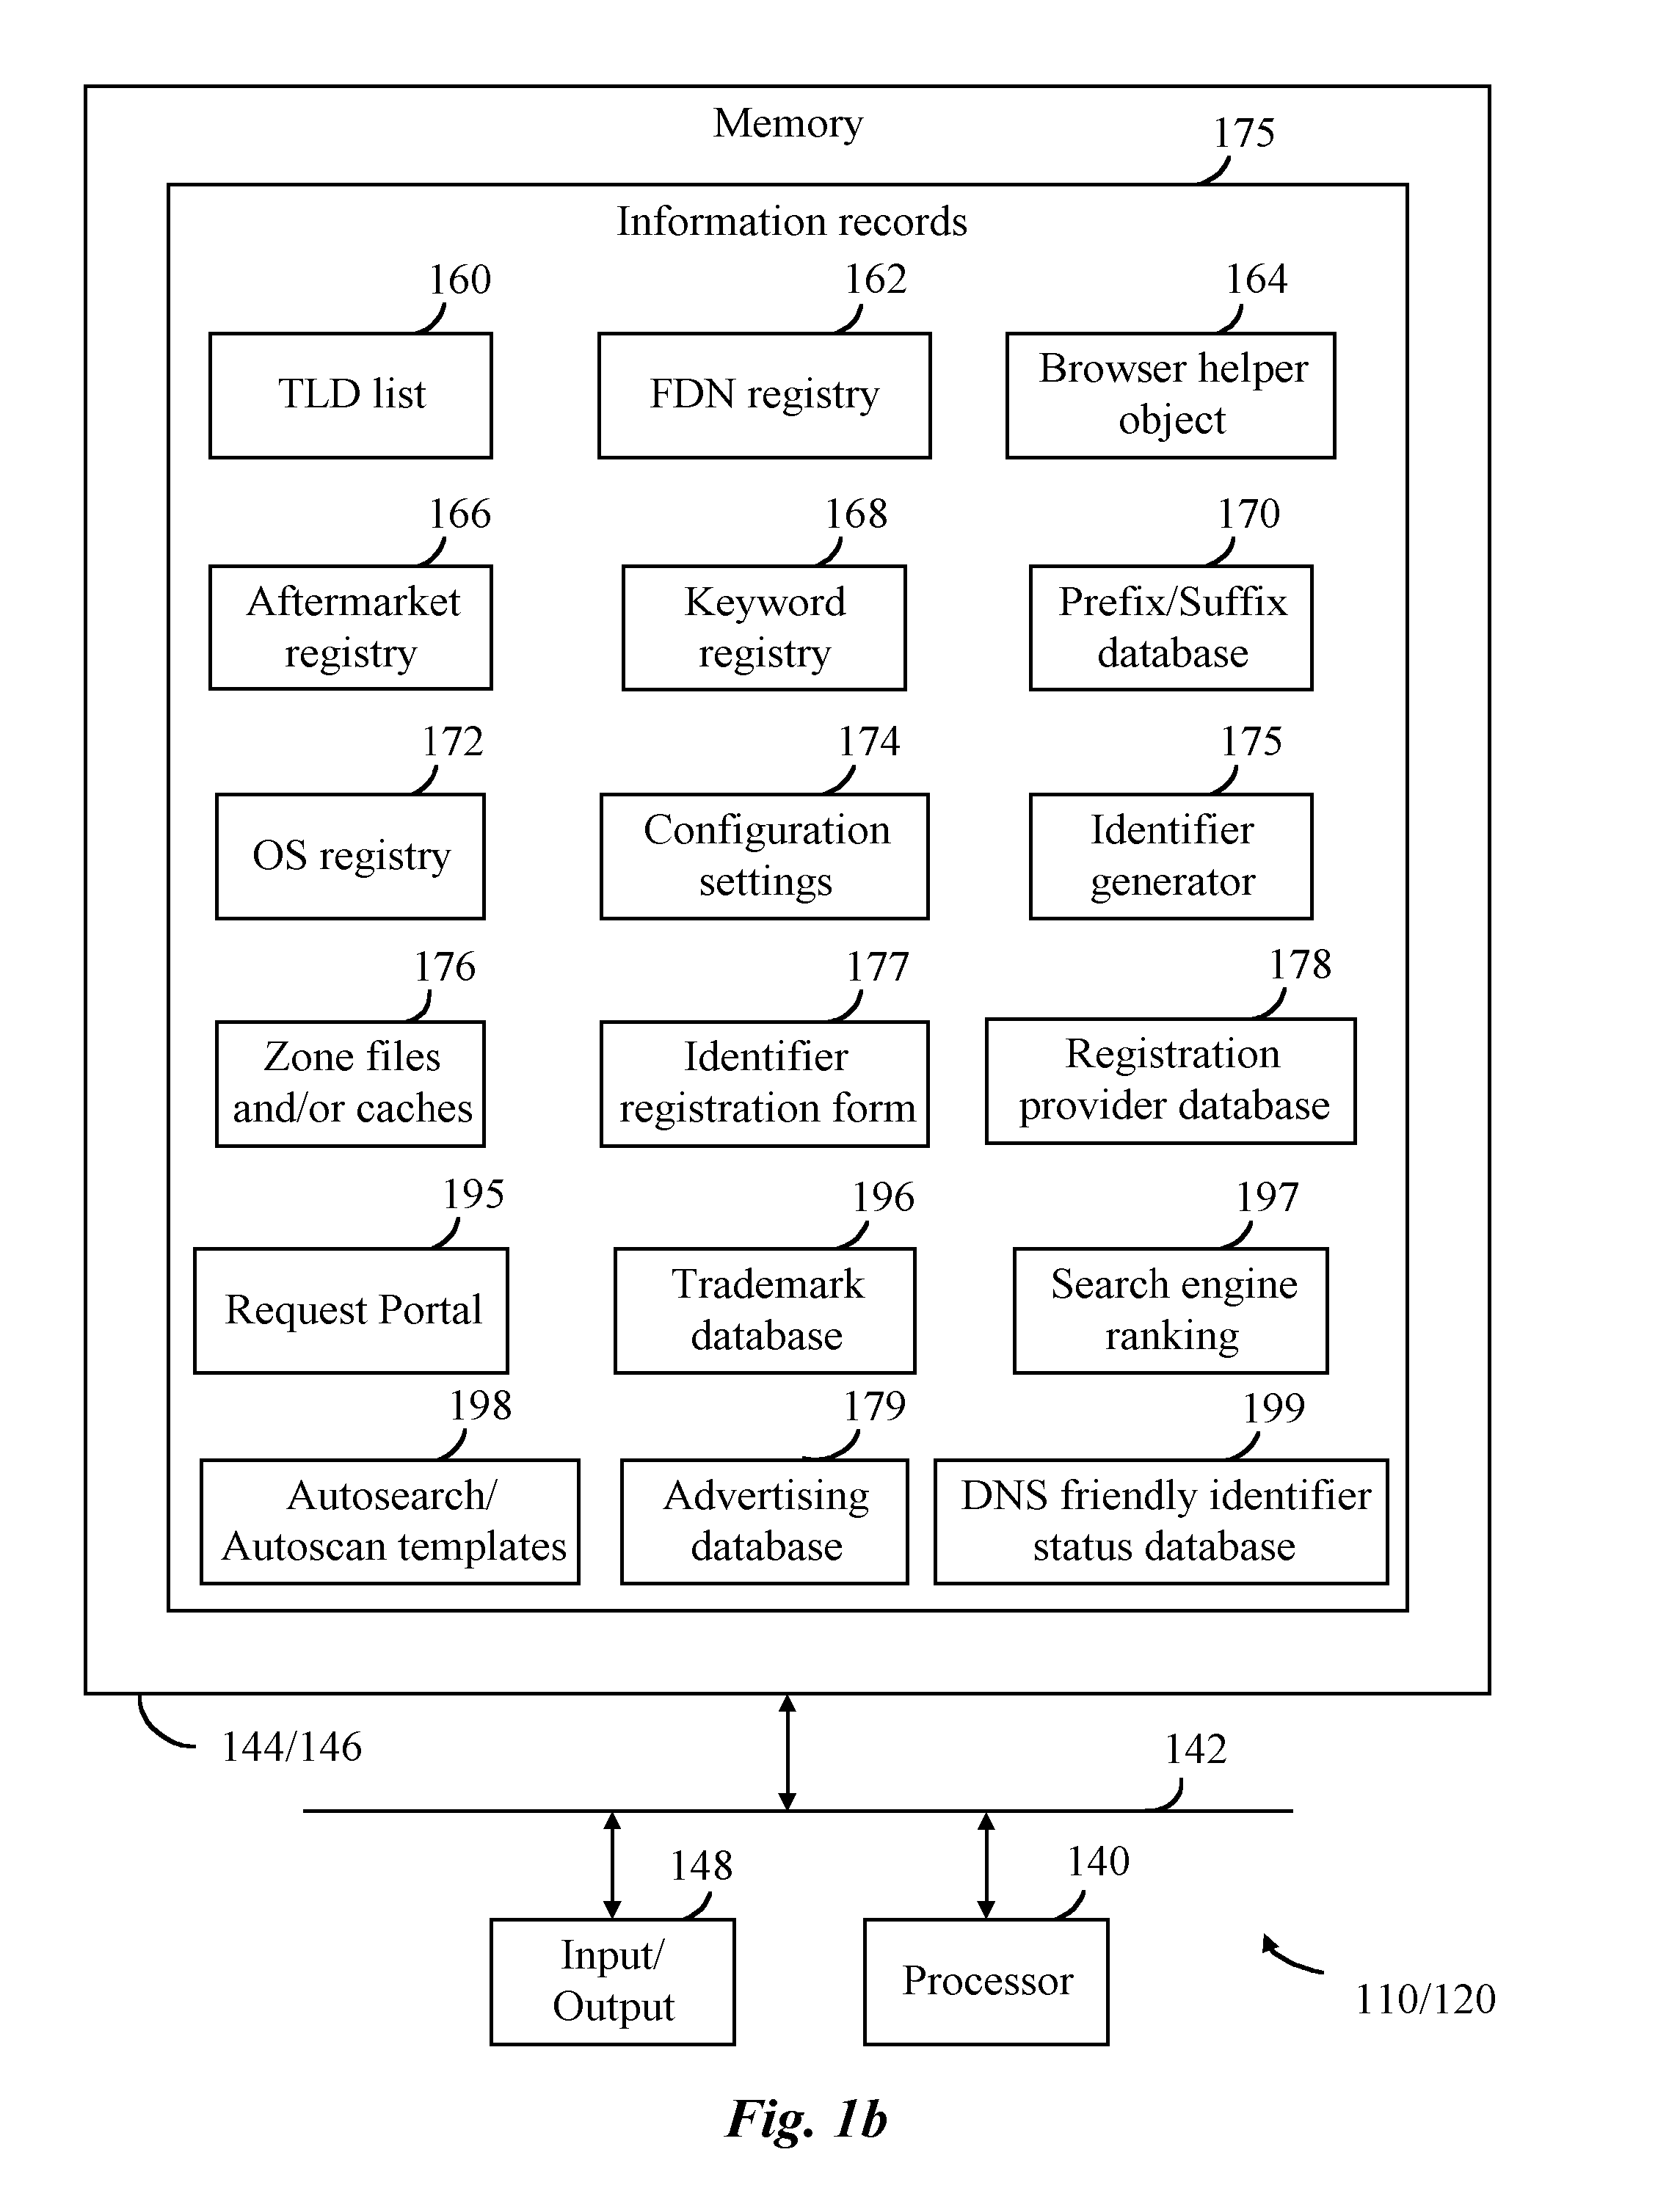 Methods, Systems, Products, And Devices For Generating And Processing DNS Friendly Identifiers